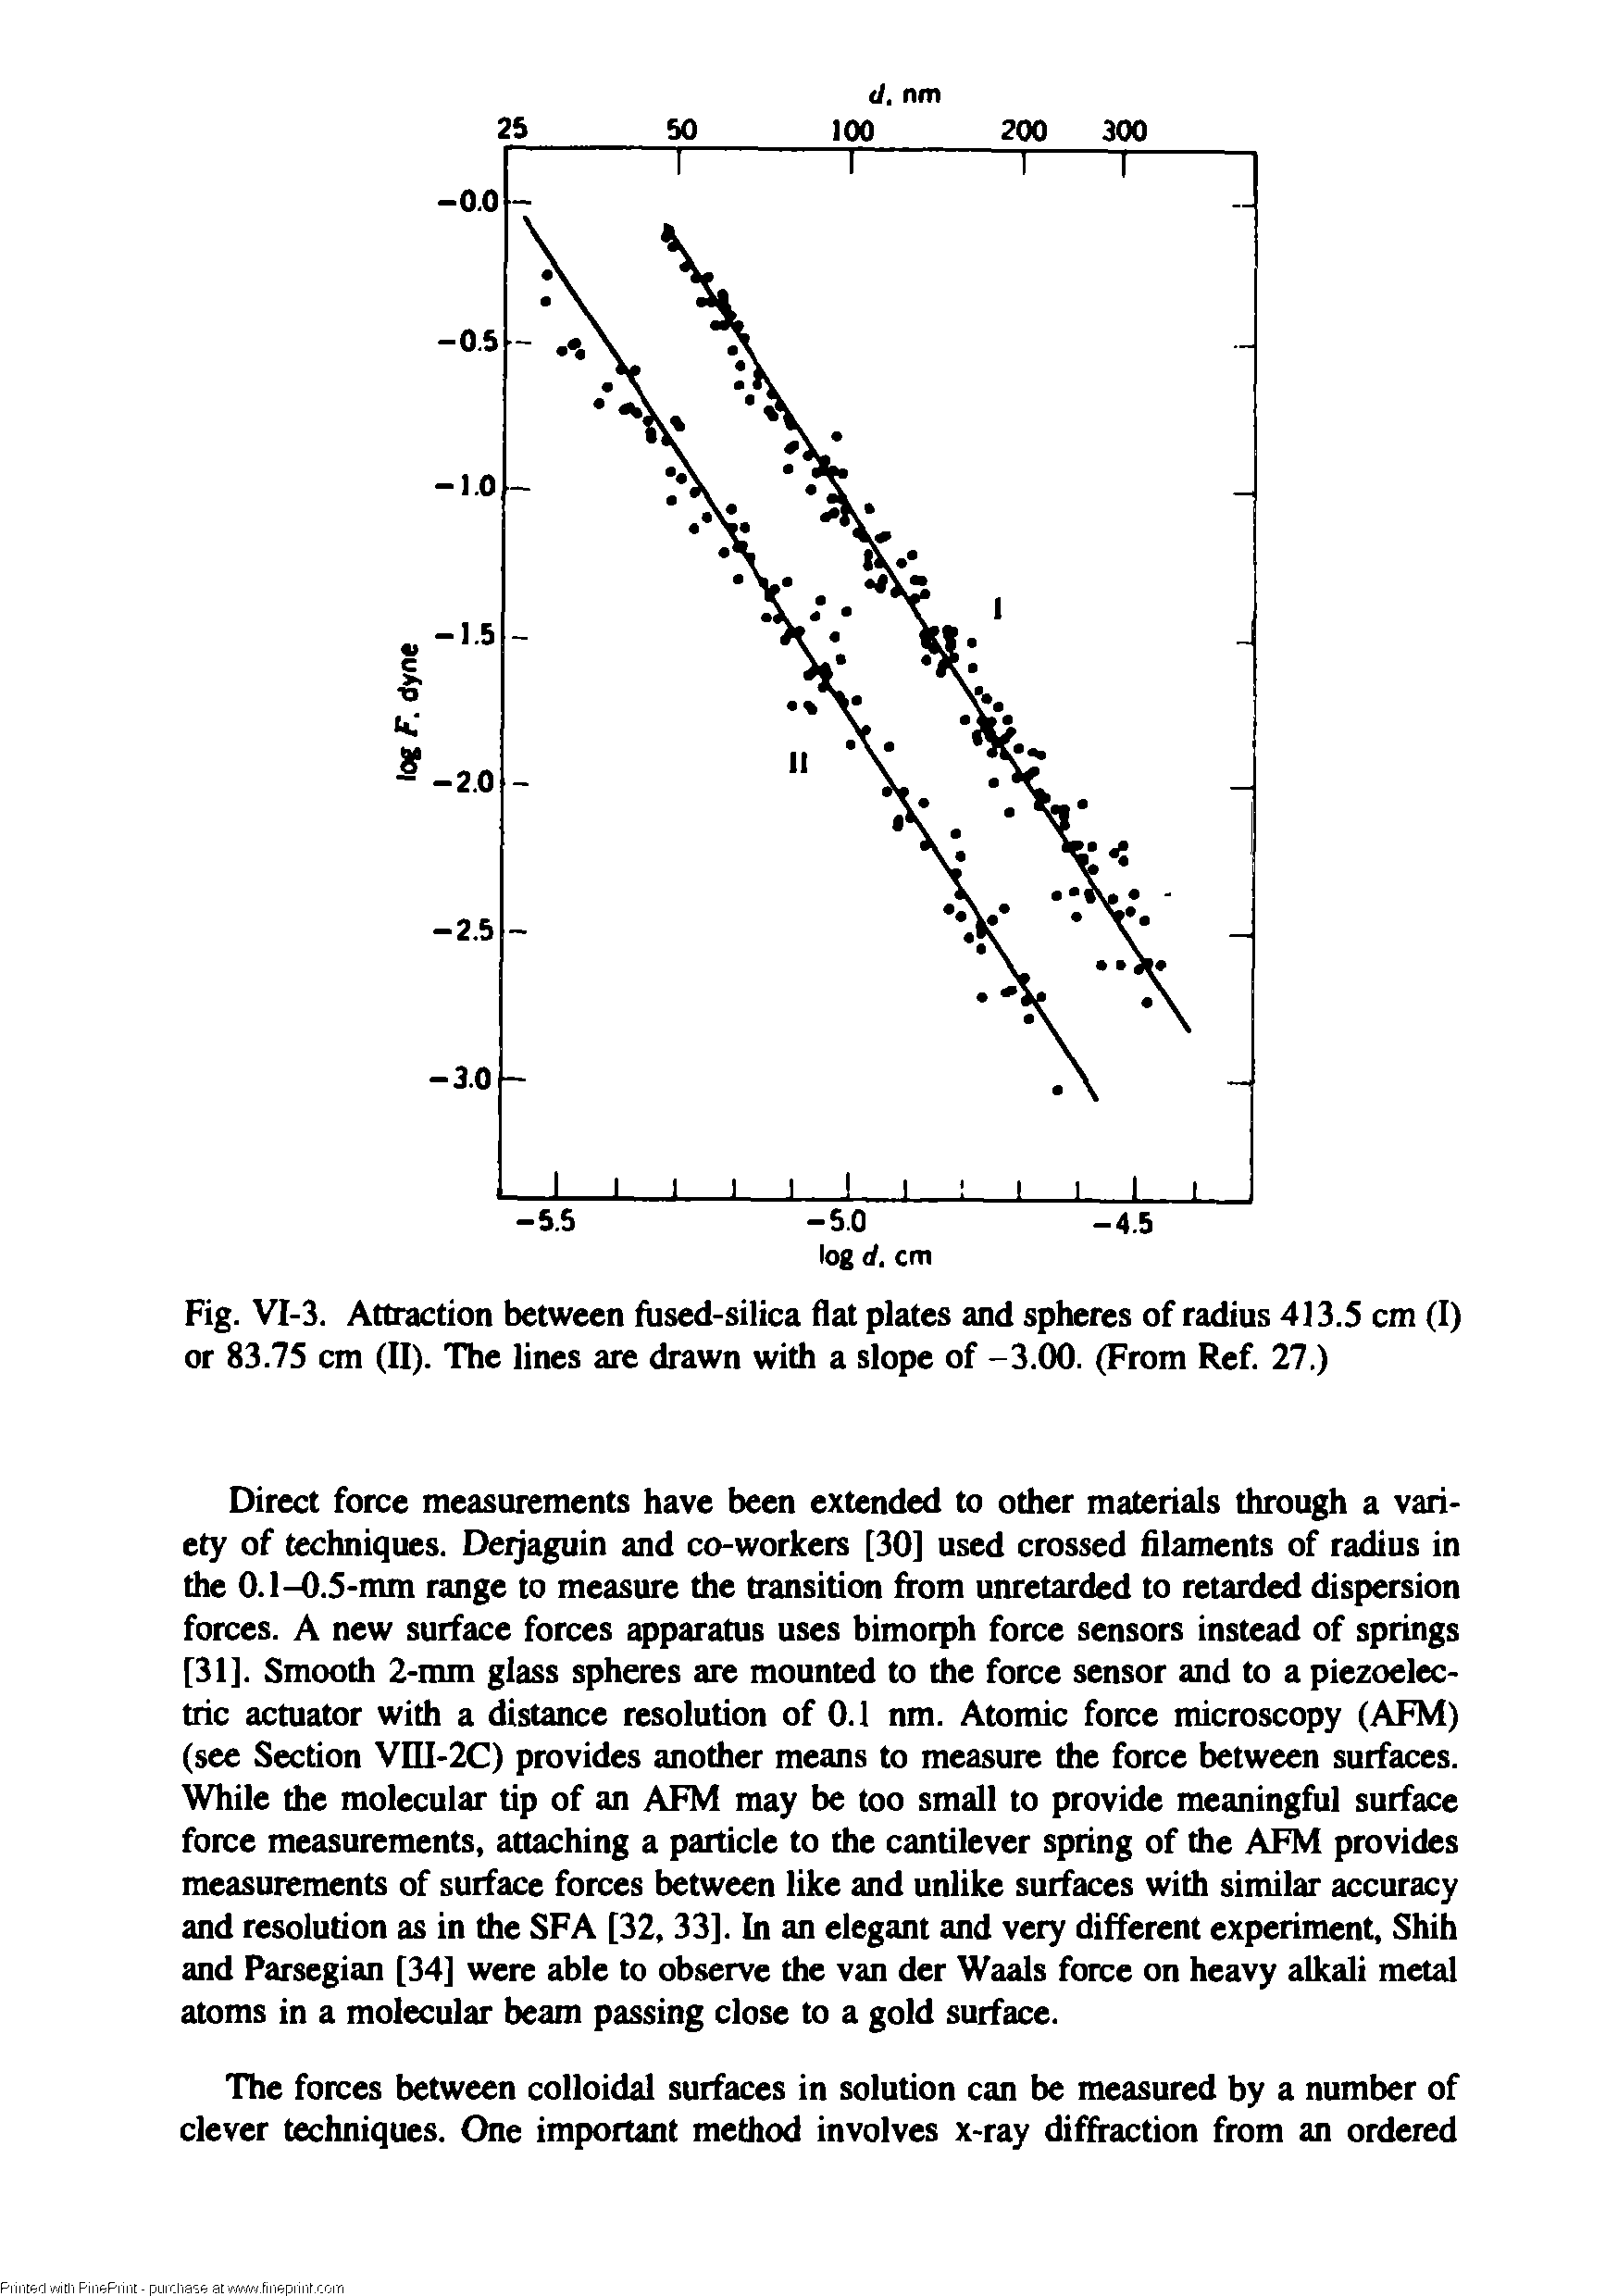 Fig. VI-3. Attraction between fused-silica flat plates and spheres of radius 413.5 cm (I) or 83.75 cm (II). The lines are drawn with a slope of -3.00. (From Ref. 27.)...